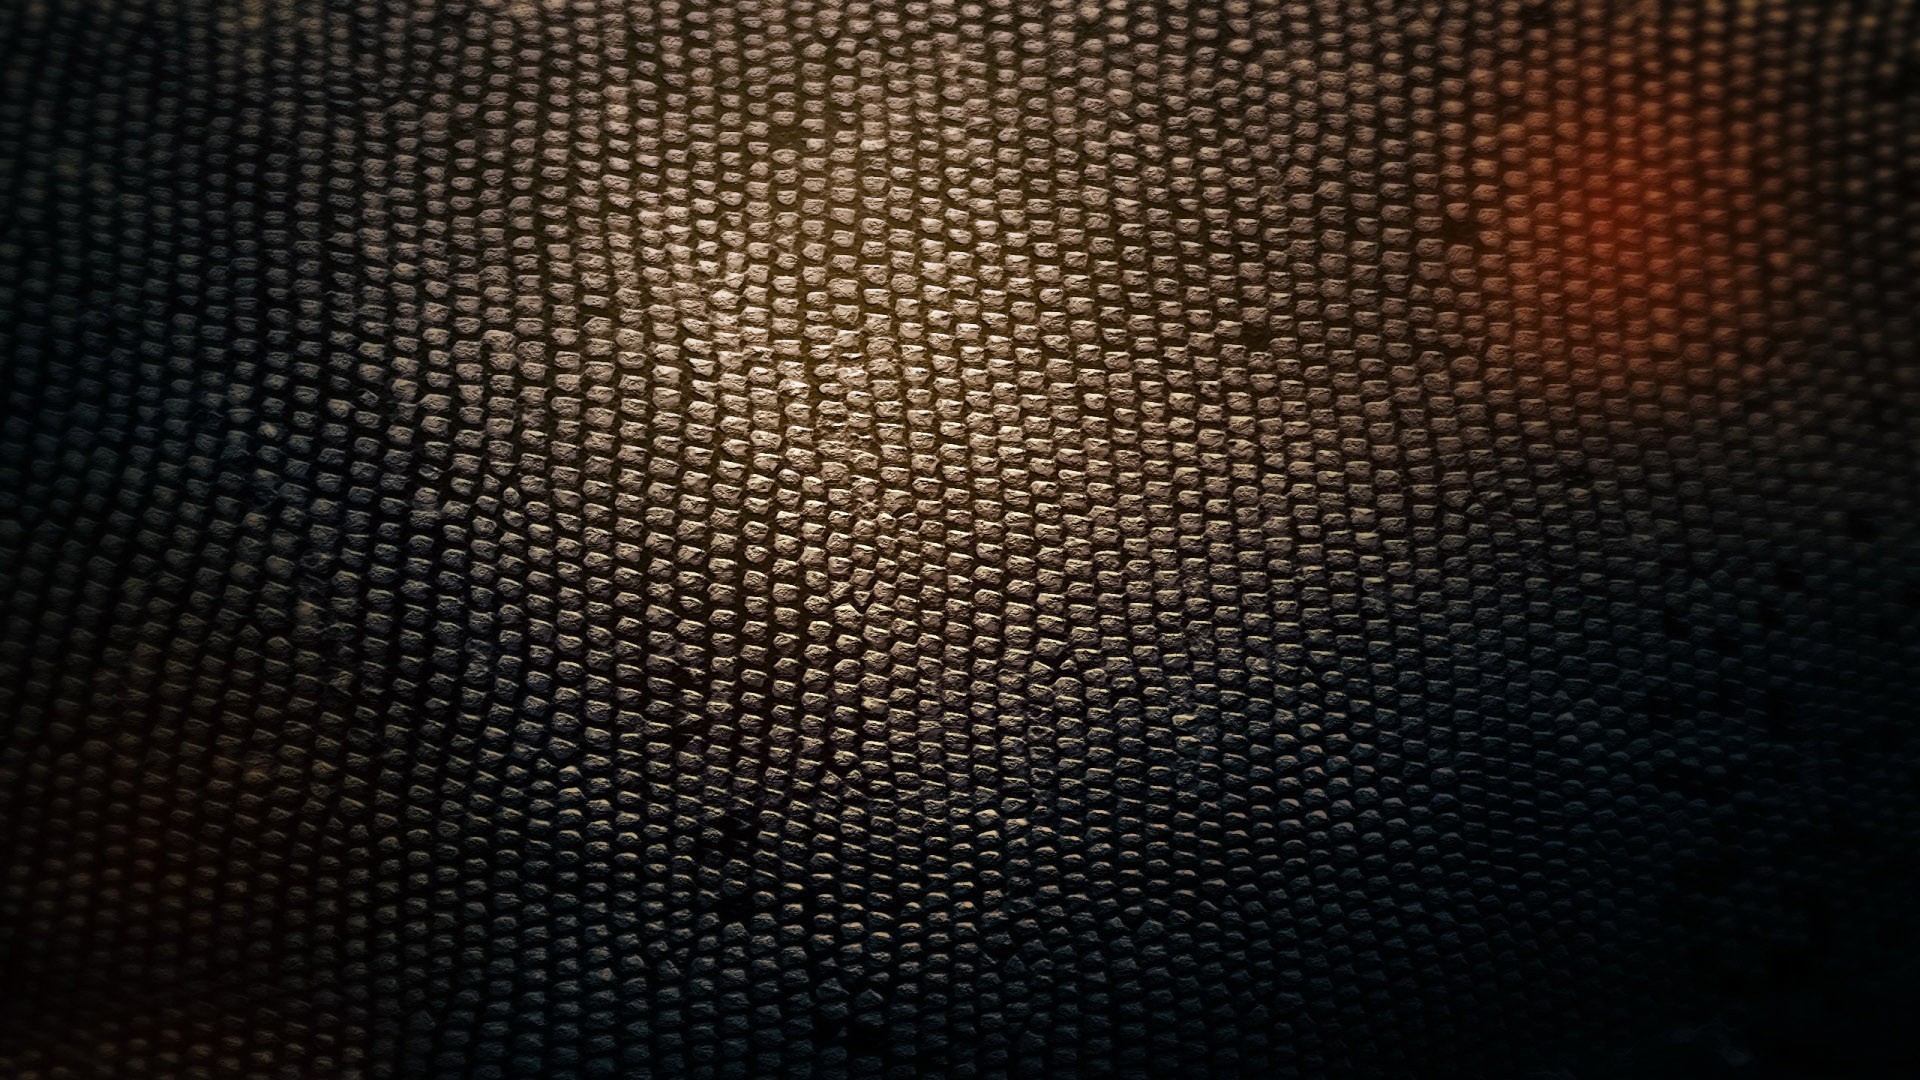 Snake skin, photography, 1920x1080 HD Wallpaper and FREE Stock Photo